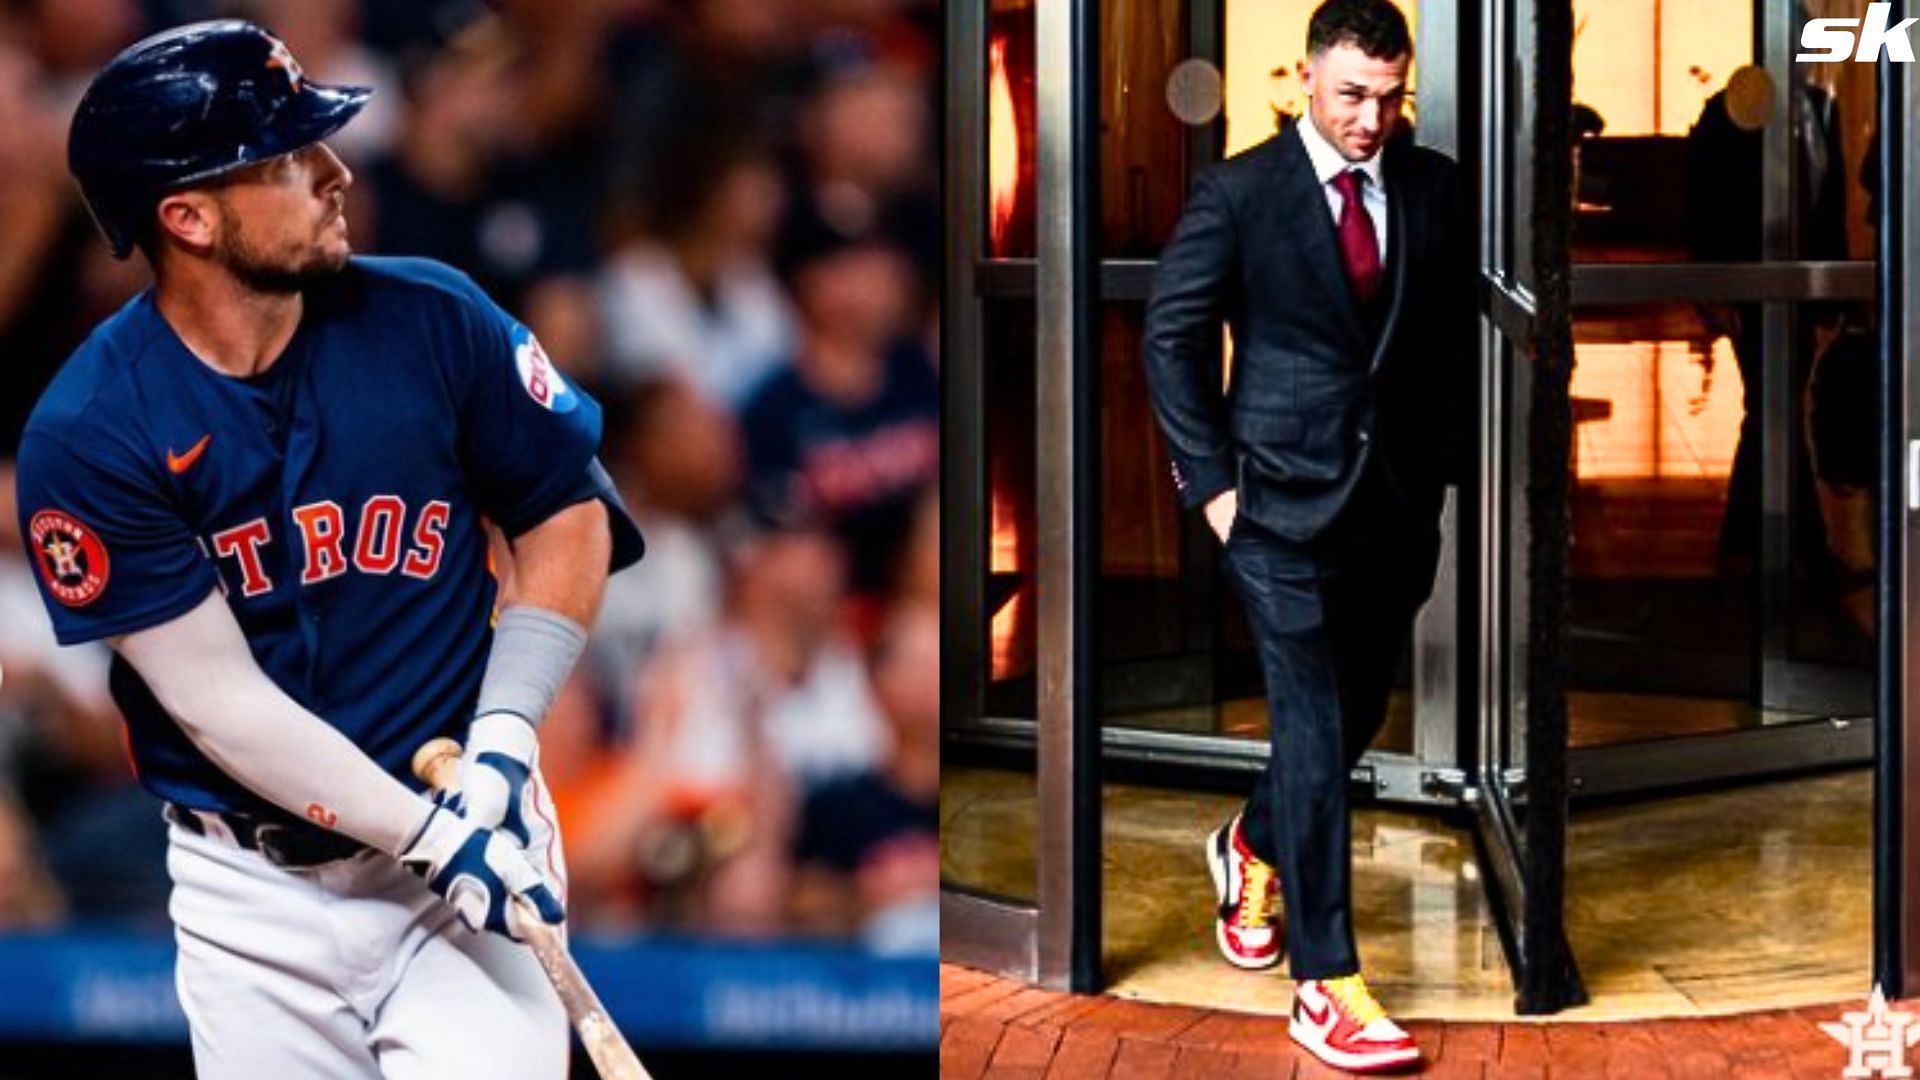 Alex Bregman: In Photos: Alex Bregman defies norms for White House visit,  rocks bright sneakers with dapper suit